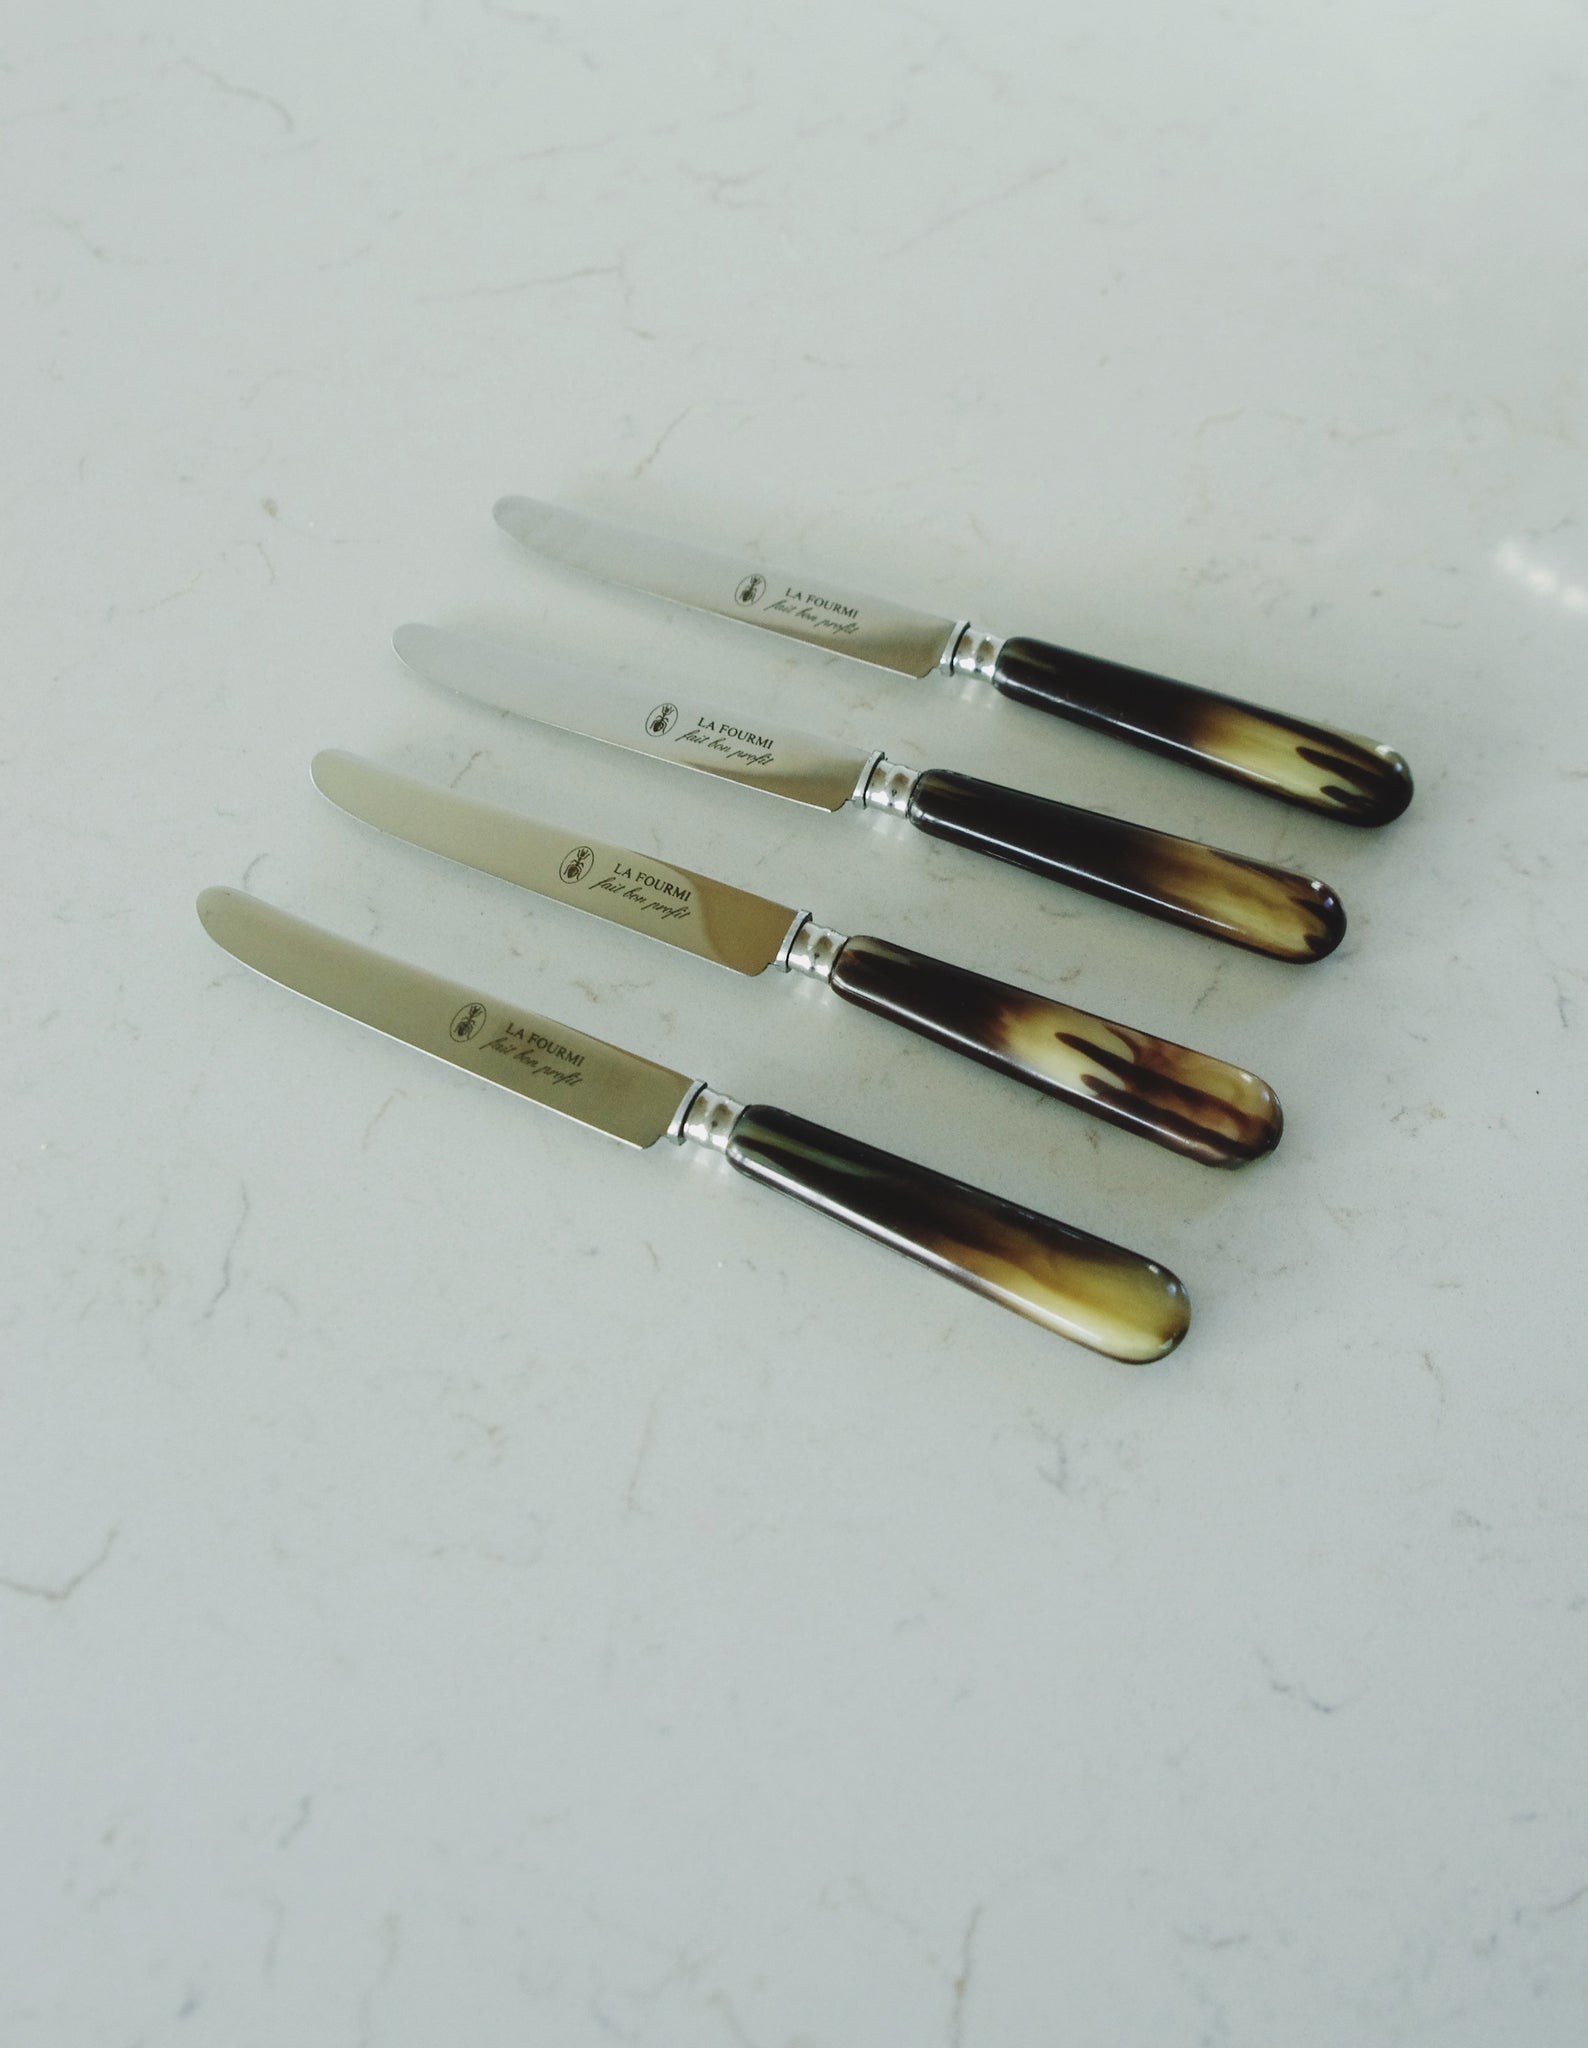 Set of vintage French dessert knives with marbled handles on a marble countertop.